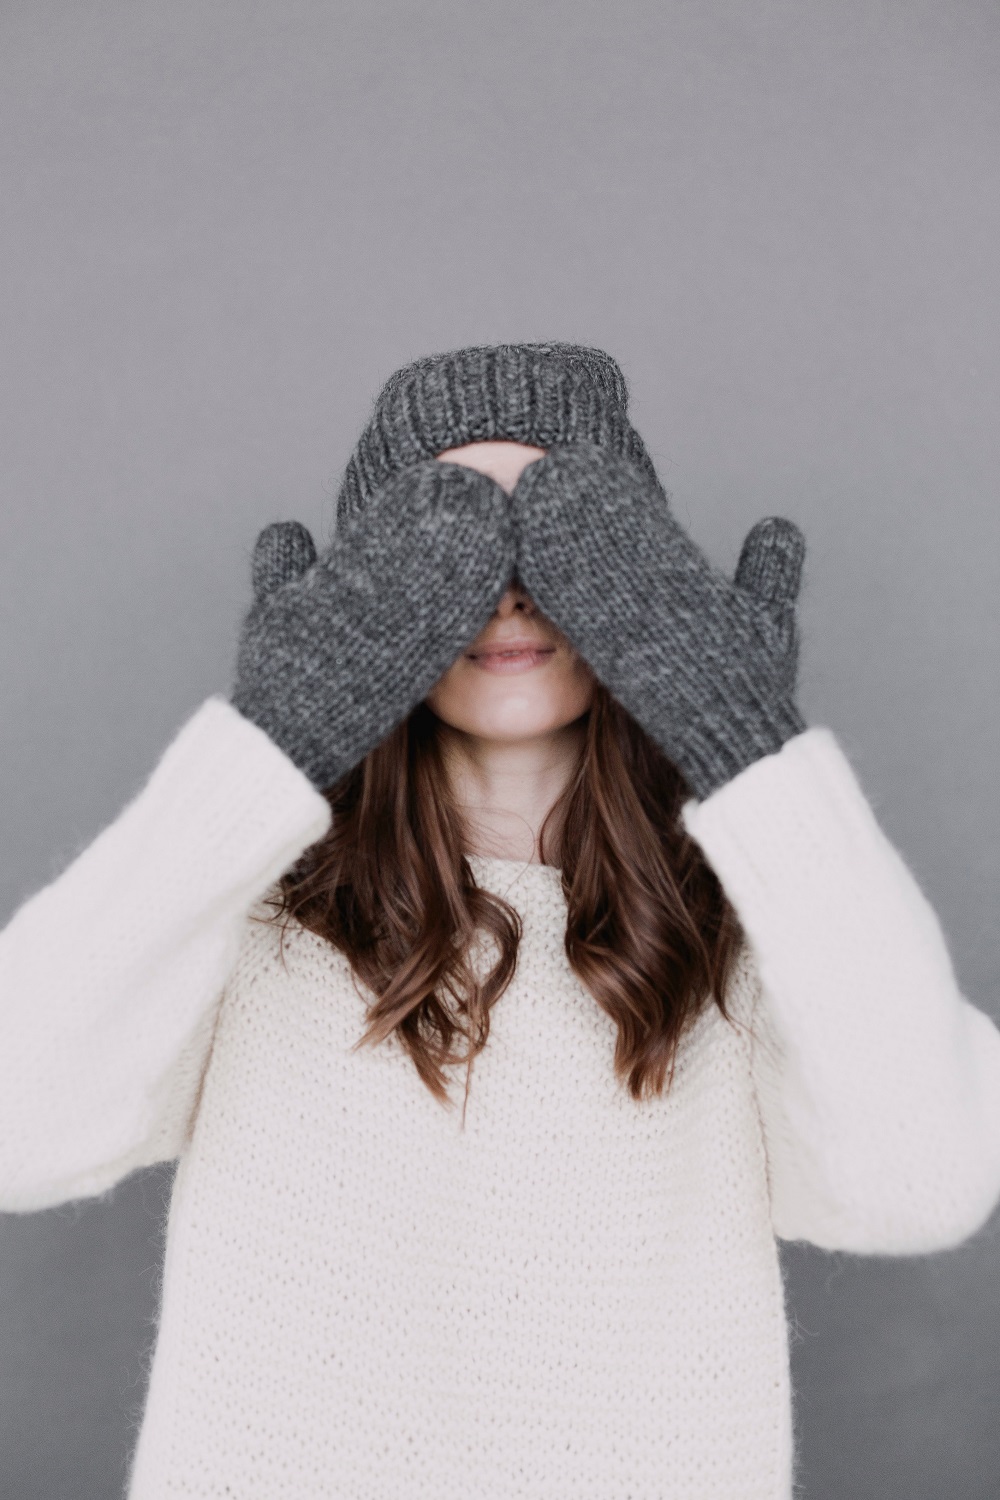 12 Cold Weather Clothing Hacks That Will Keep You Warm and Cozy All Winter Long